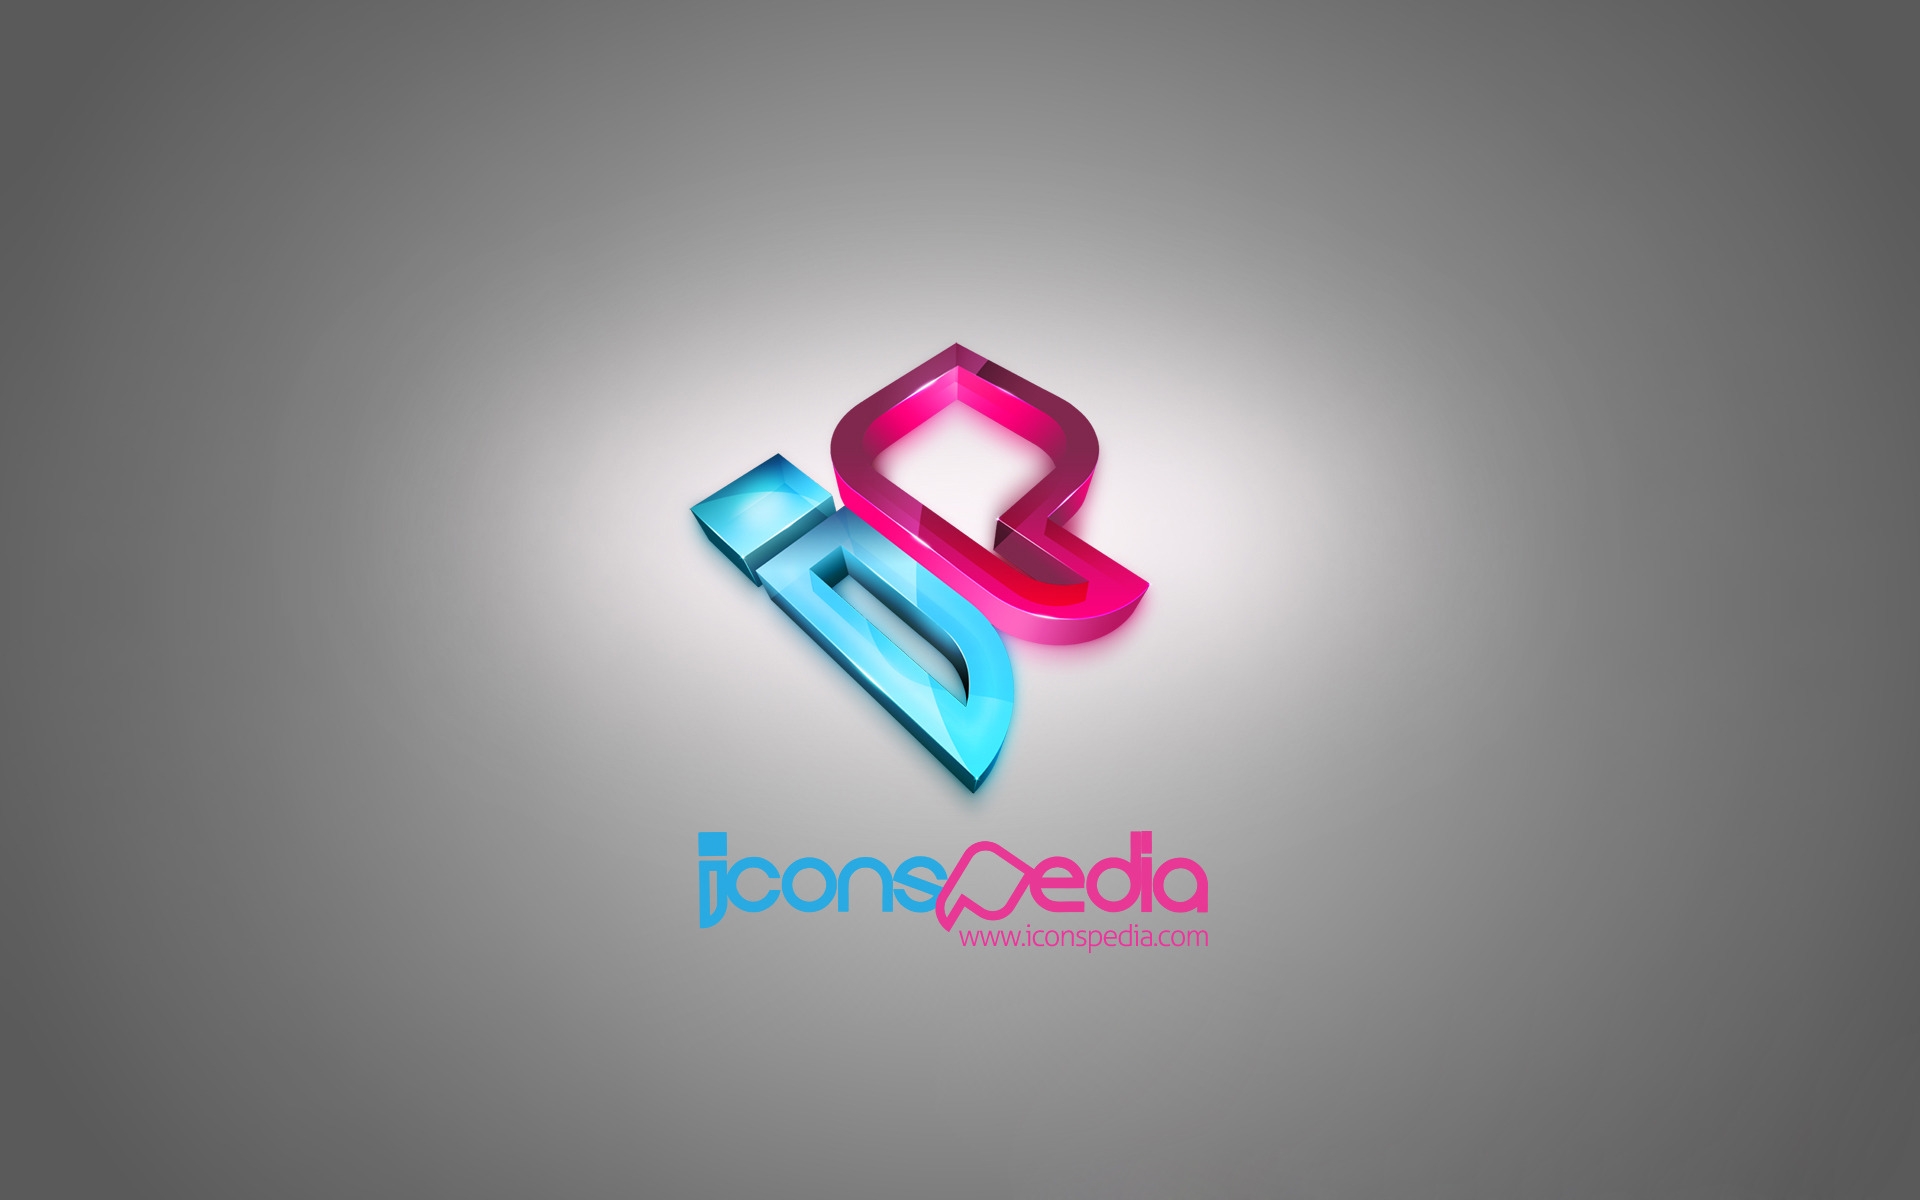 Iconspedia Logo for 1920 x 1200 widescreen resolution